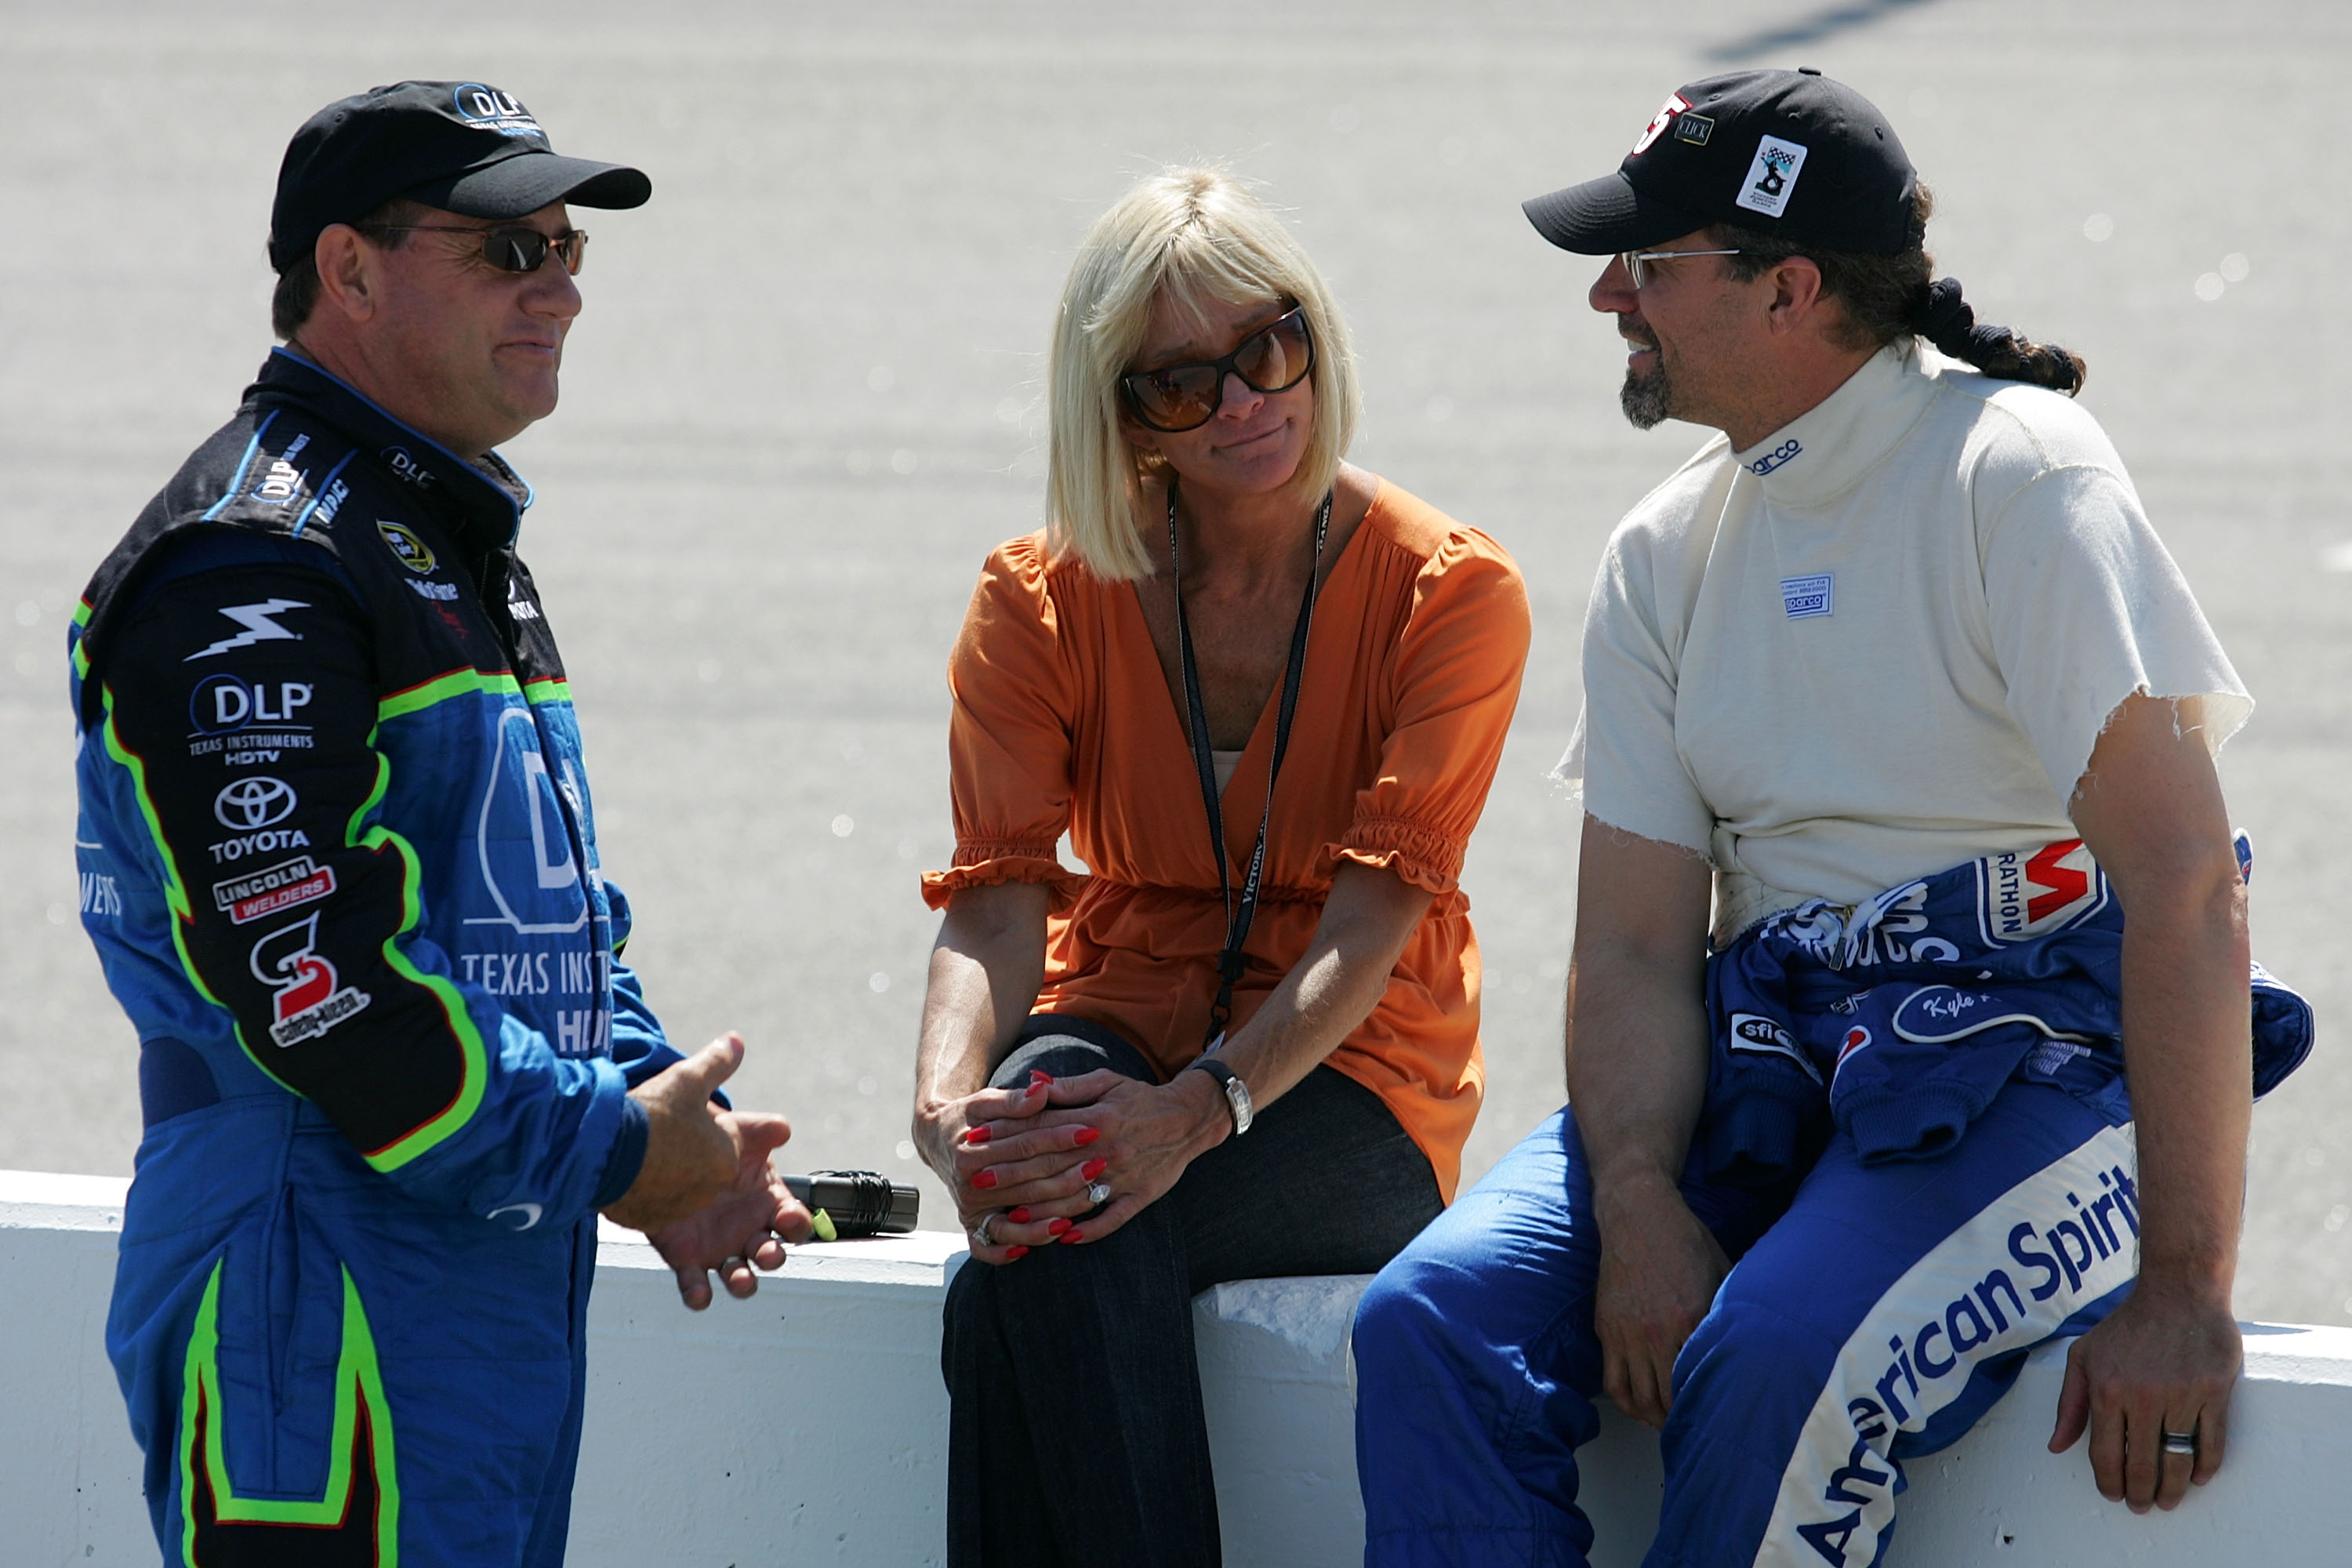 Ken Schrader (L) with Pattie Petty (C) and Kyle Petty (R) before the NASCAR Sprint Cup Series Chevy Rock & Roll 400 at Richmond International Raceway, on September 7, 2008, in Richmond, Virginia. | Source: Getty Images